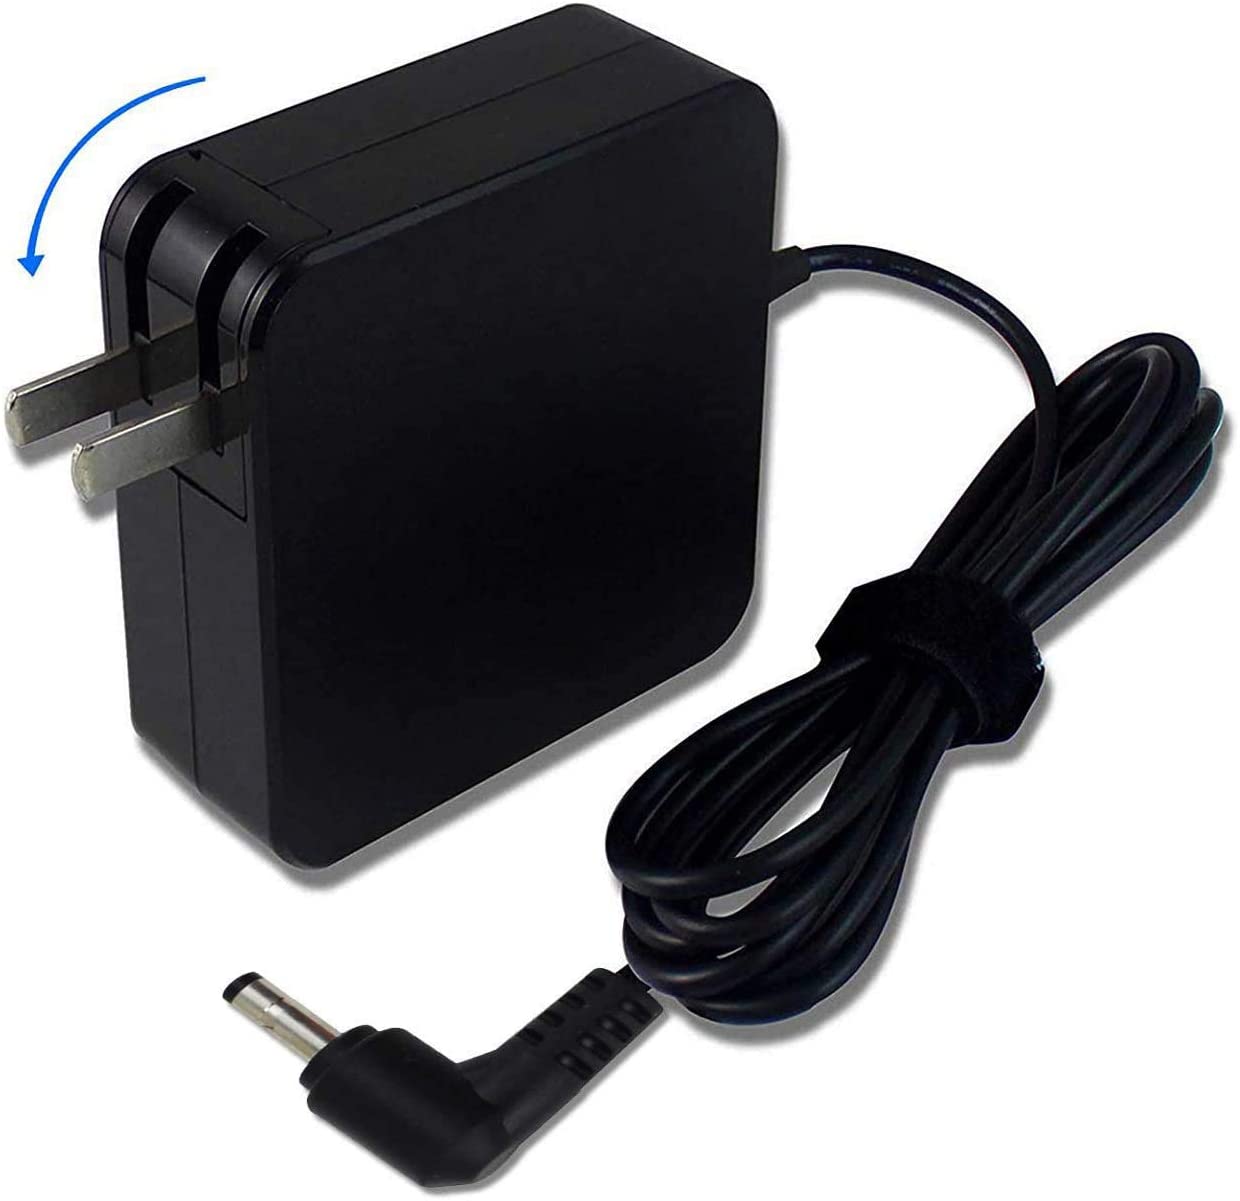 Laptop Charger Price in Kenya | Why Does my Laptop AC Adapter Not Work?